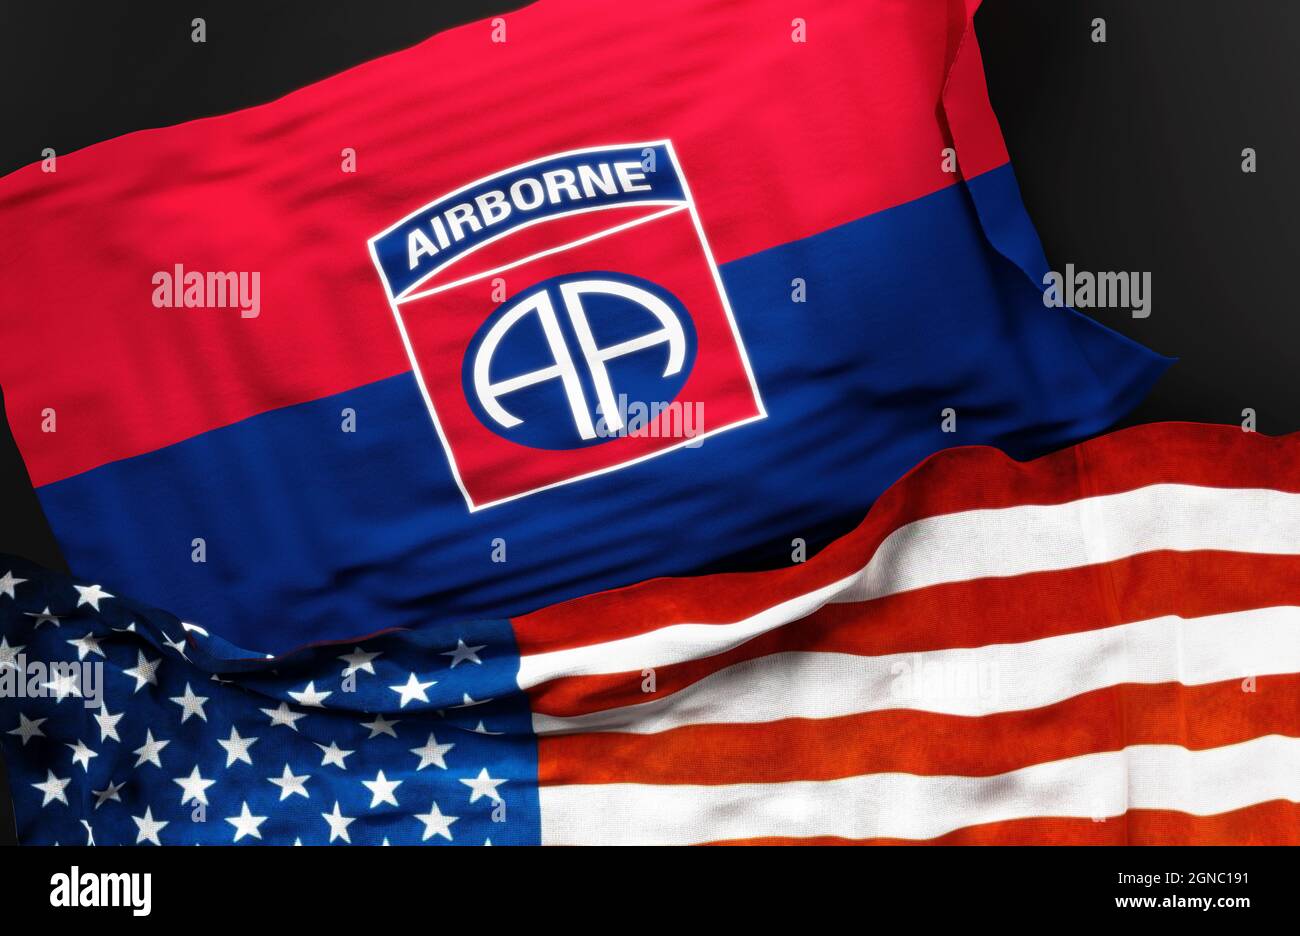 Flag of the United States Army 82nd Airborne Division along with a flag of the United States of America as a symbol of a connection between them, 3d i Stock Photo